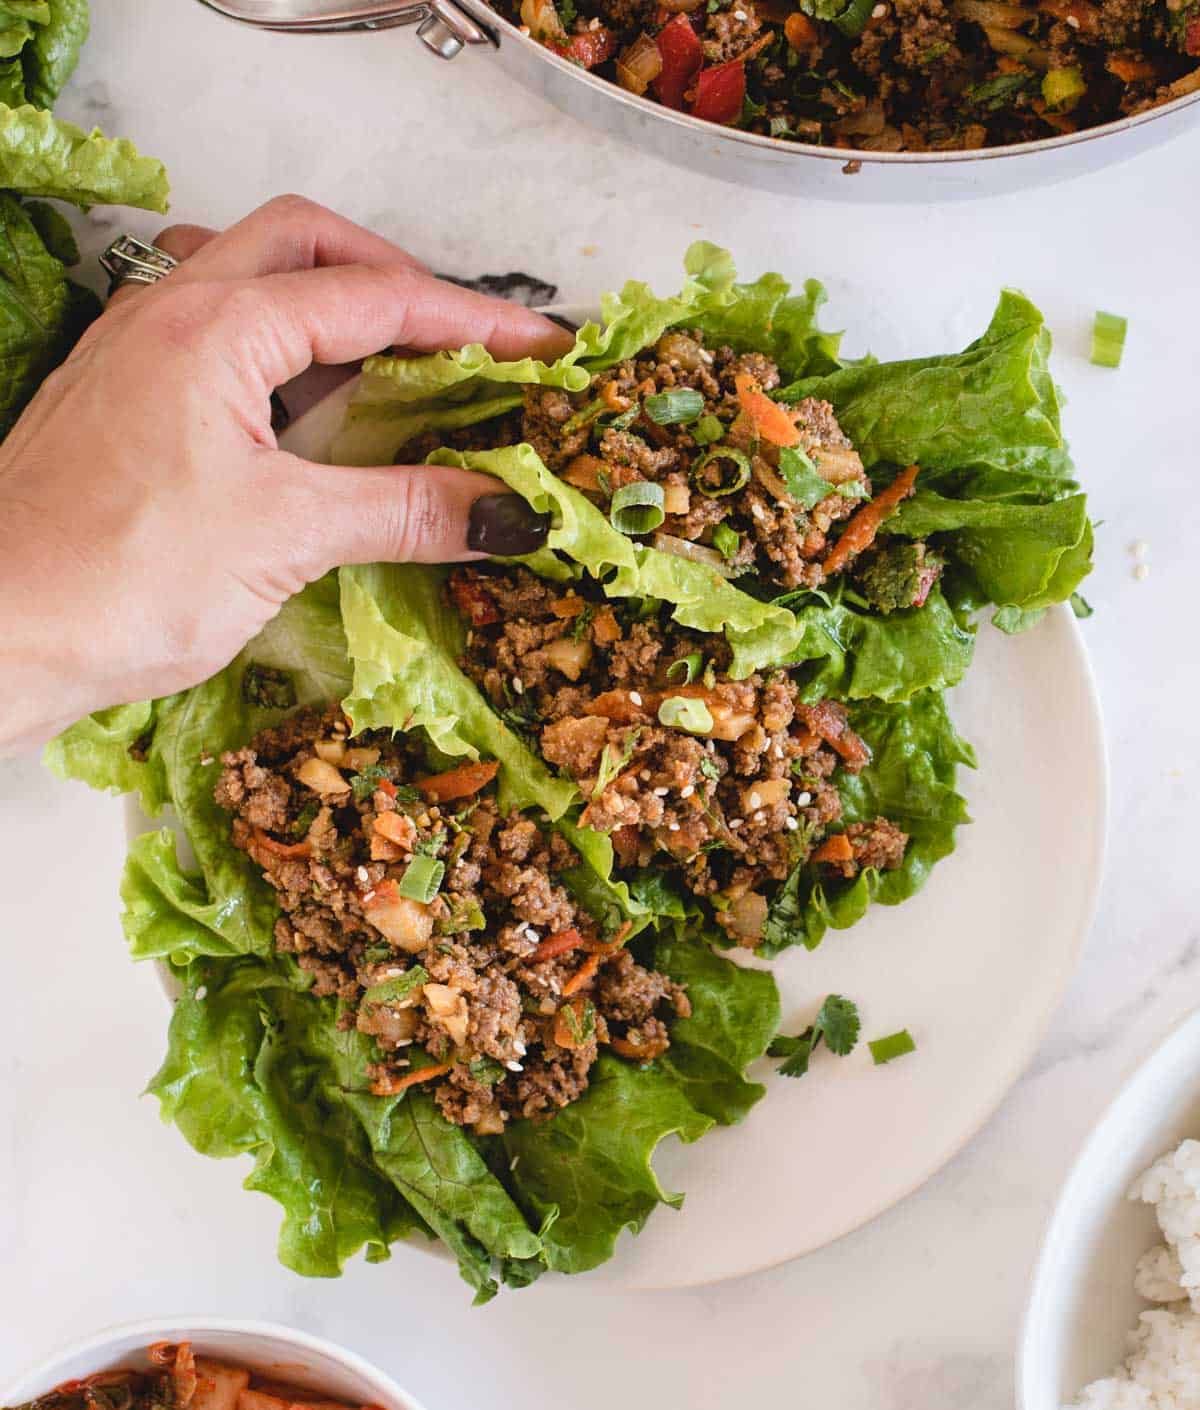 hand holding ground beef lettuce wrap from overhead